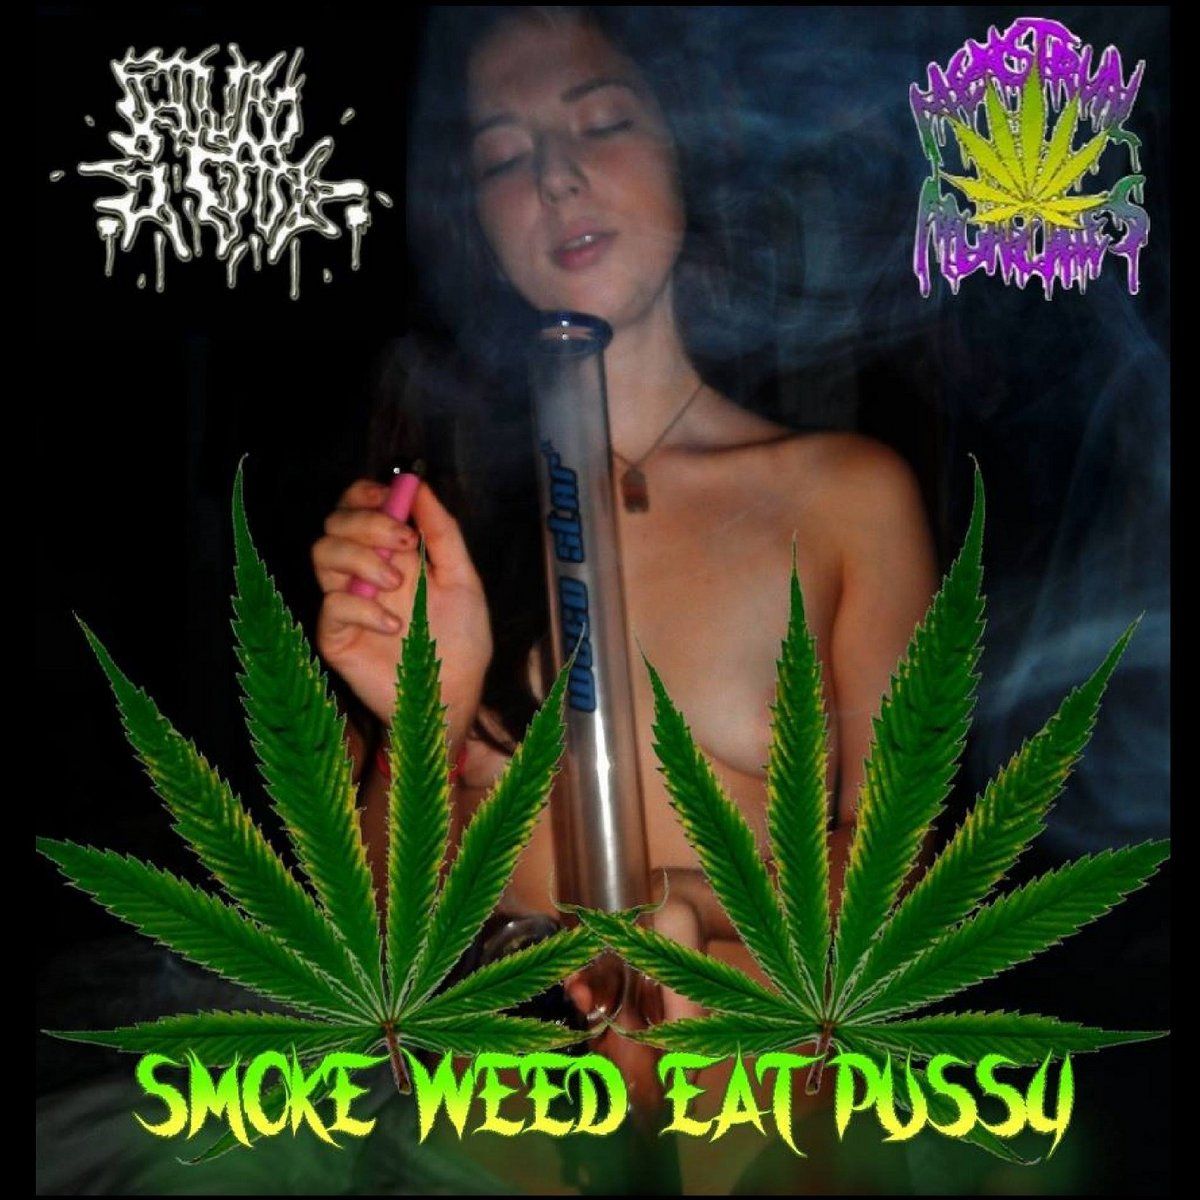 Butch recomended weed need